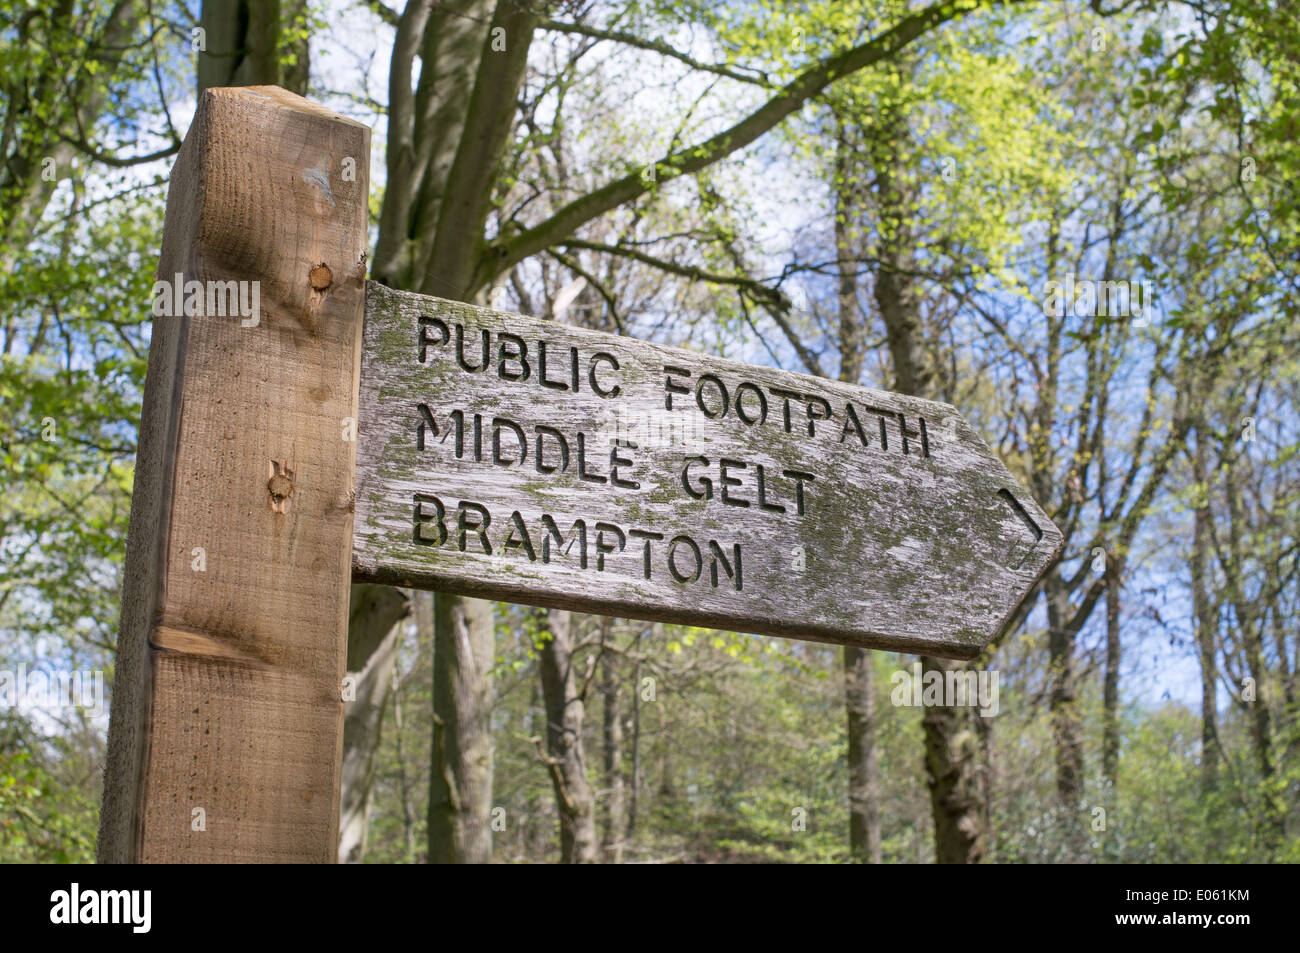 Wooden public footpath sign along the river Gelt valley near Brampton, north west England UK Stock Photo